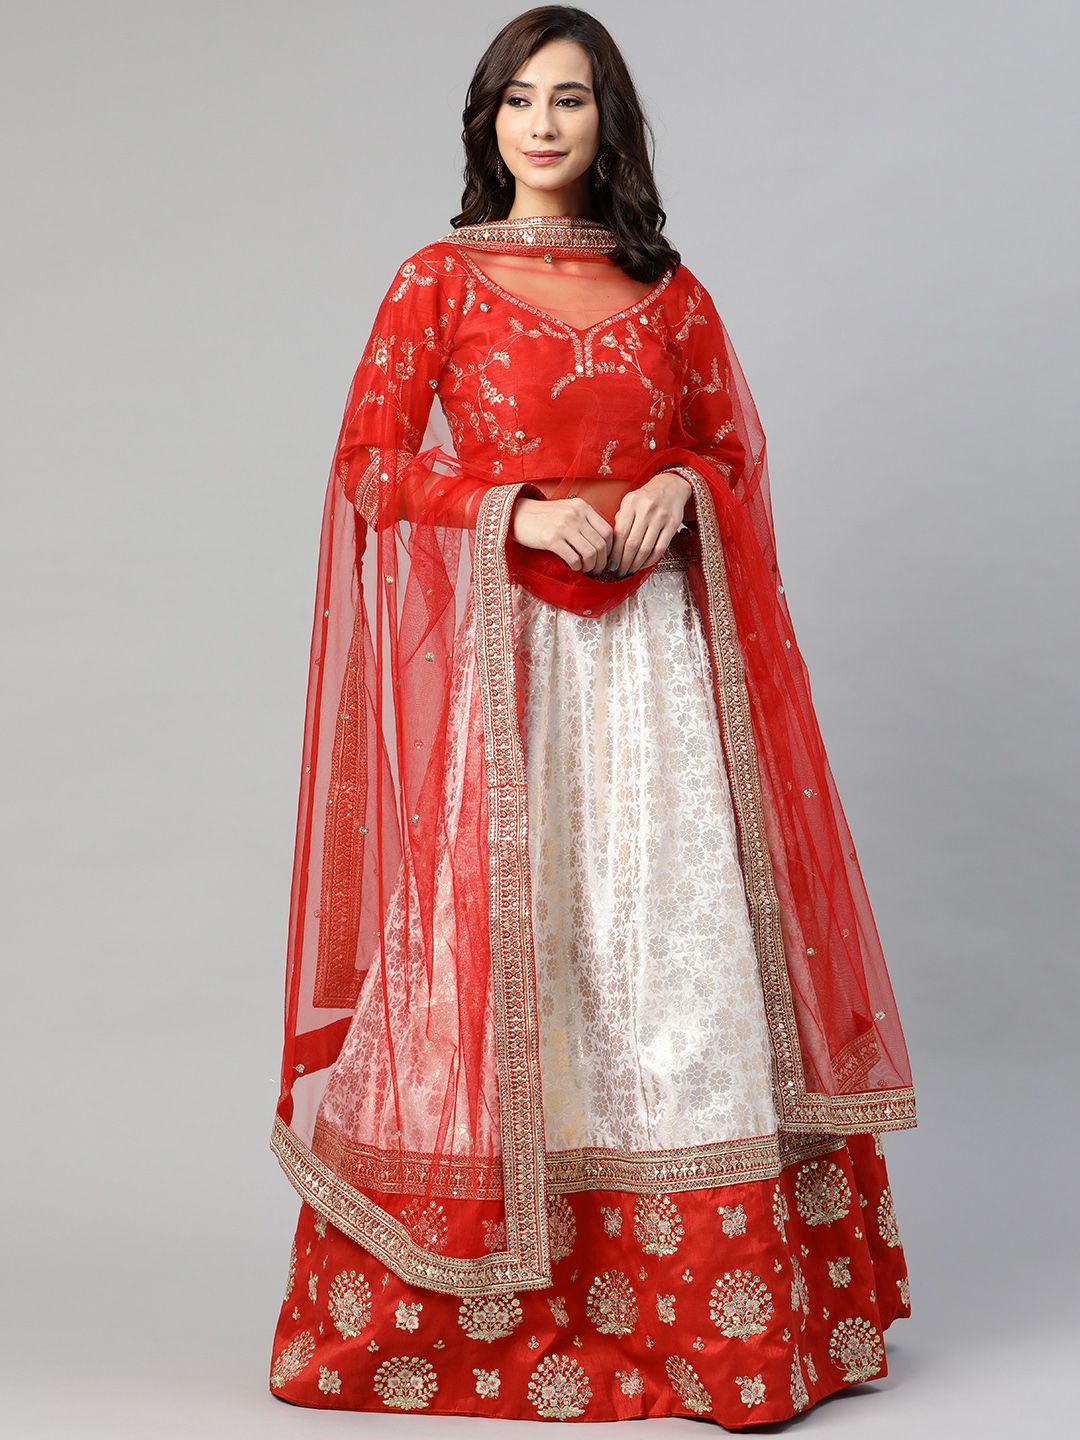 SHUBHVASTRA Red & Beige Embellished Semi-Stitched Lehenga & Unstitched Blouse With Dupatta Price in India